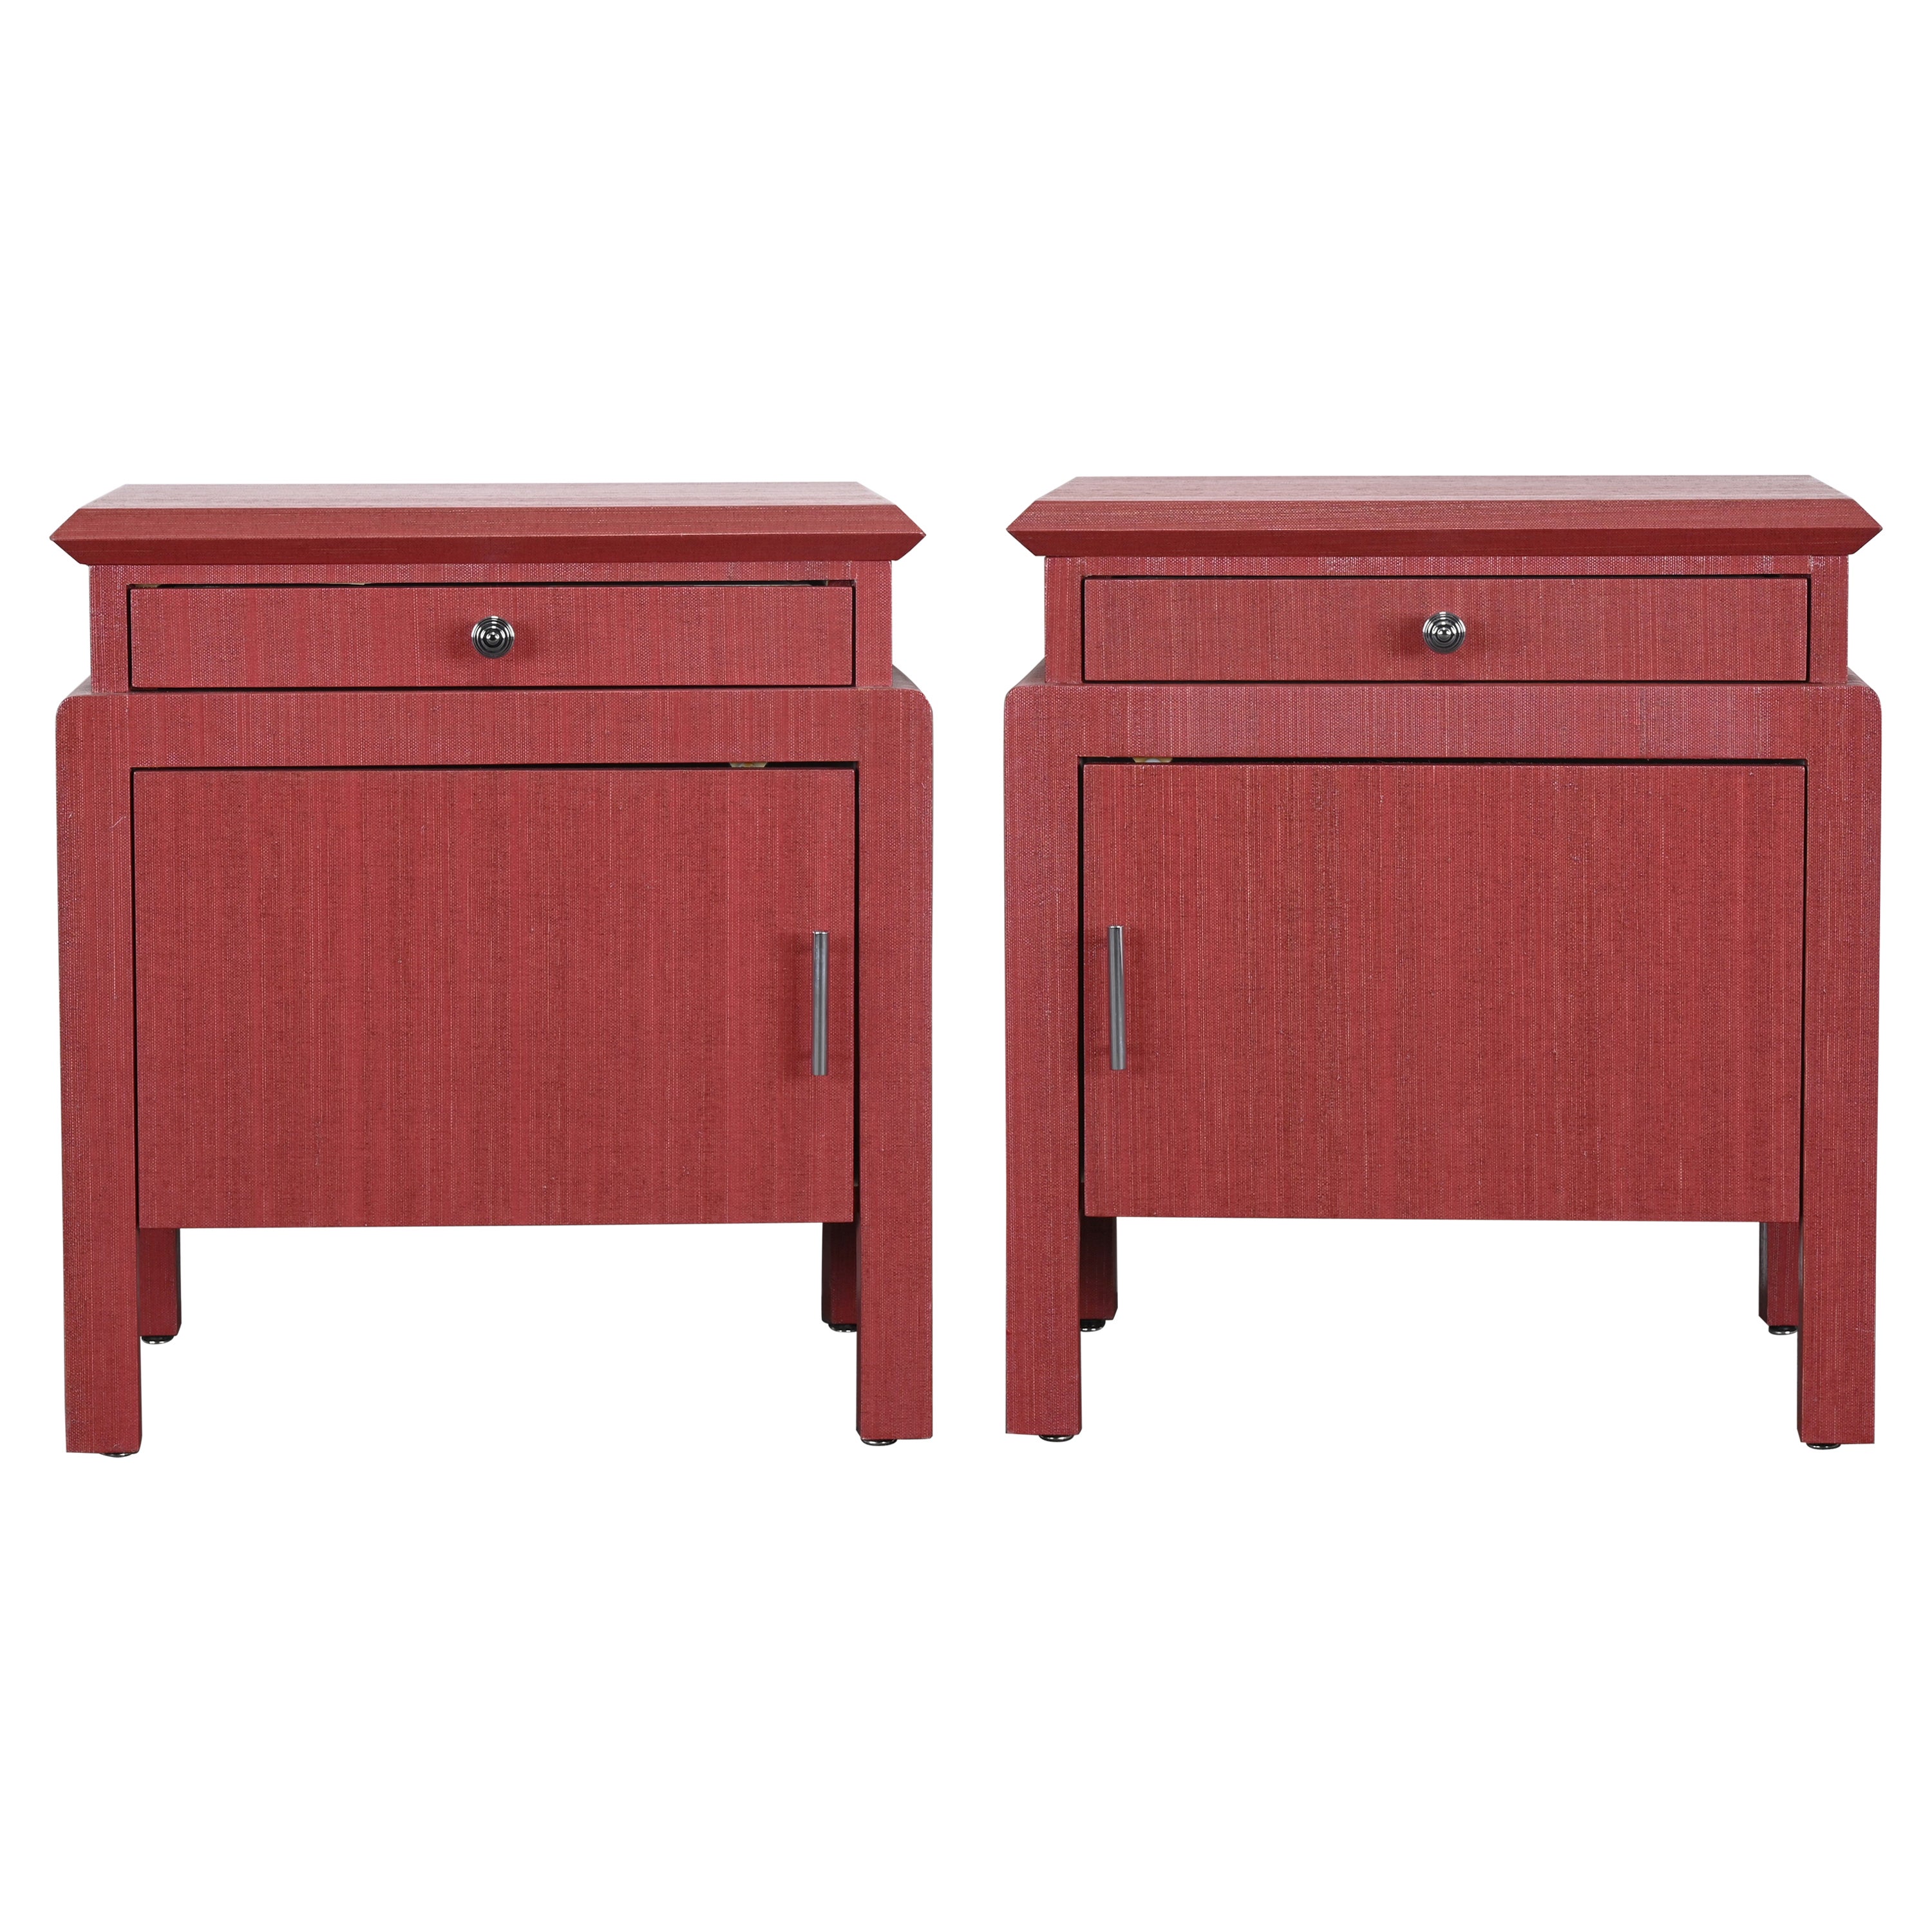 Pair of Coral Toned Harrison Van Horn Linen Wrapped Bedside Tables, 1980s For Sale